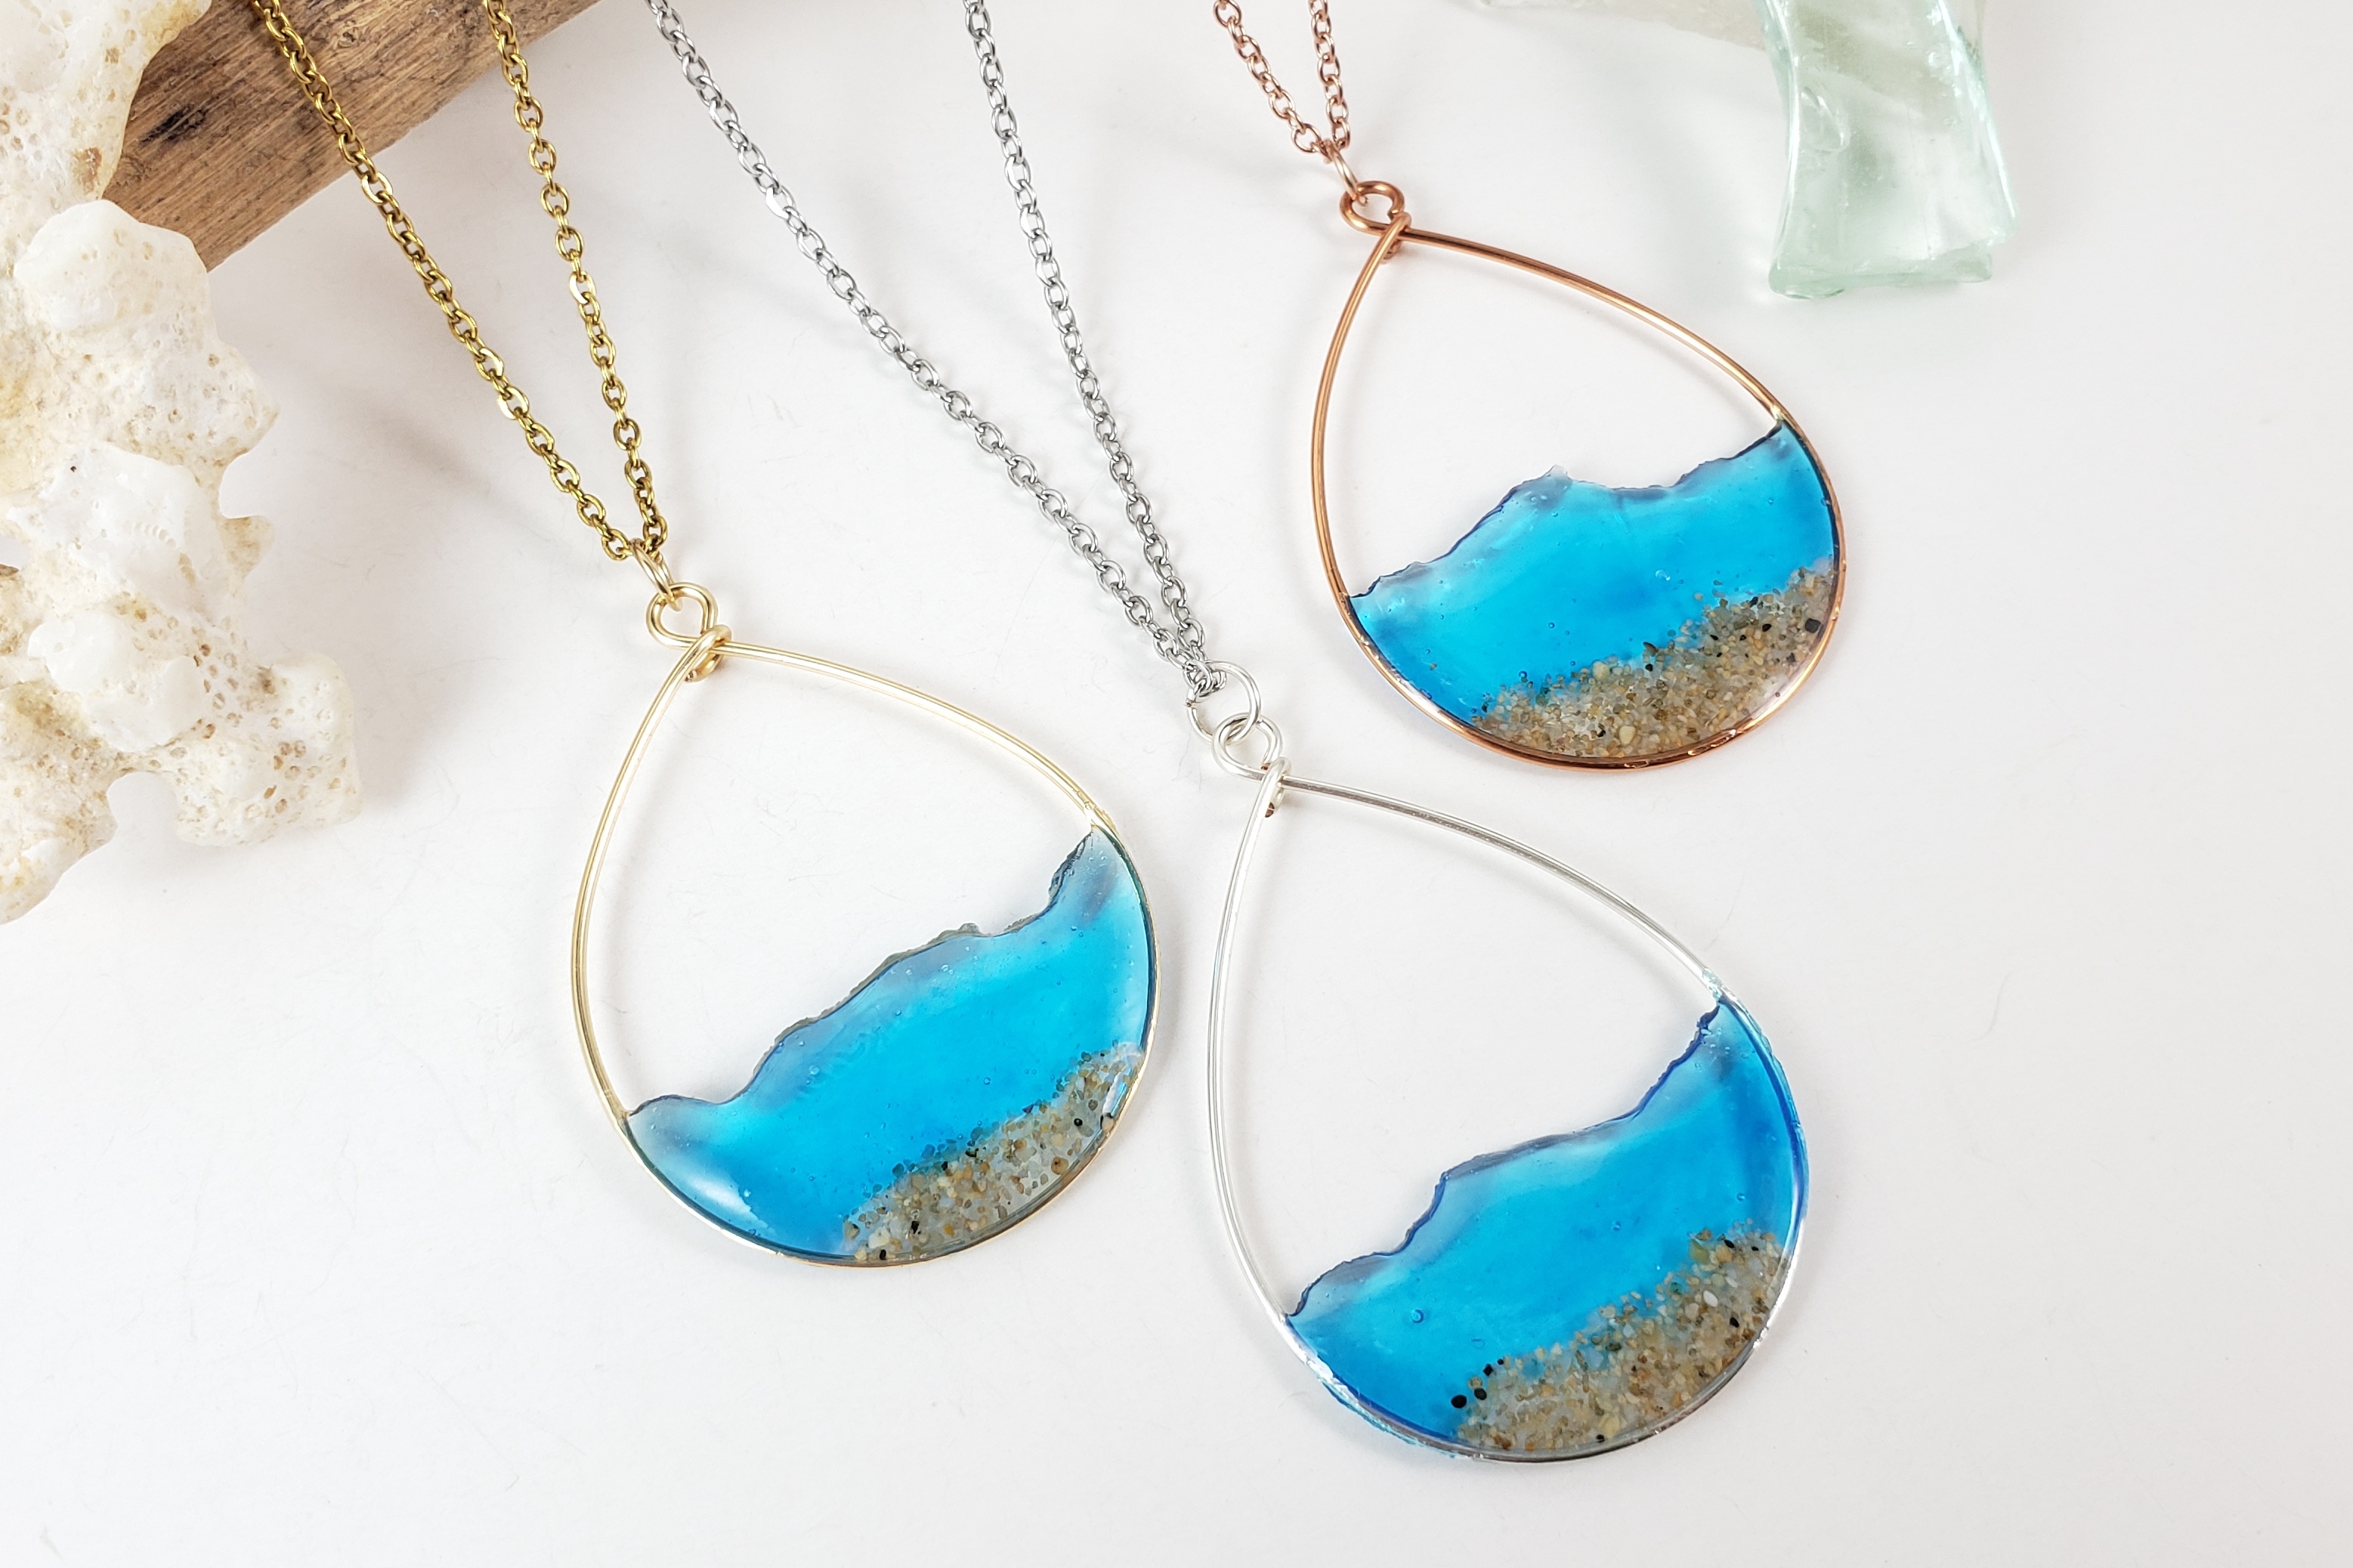 Sand and water teardrop earrings and necklace | skinny pig designs